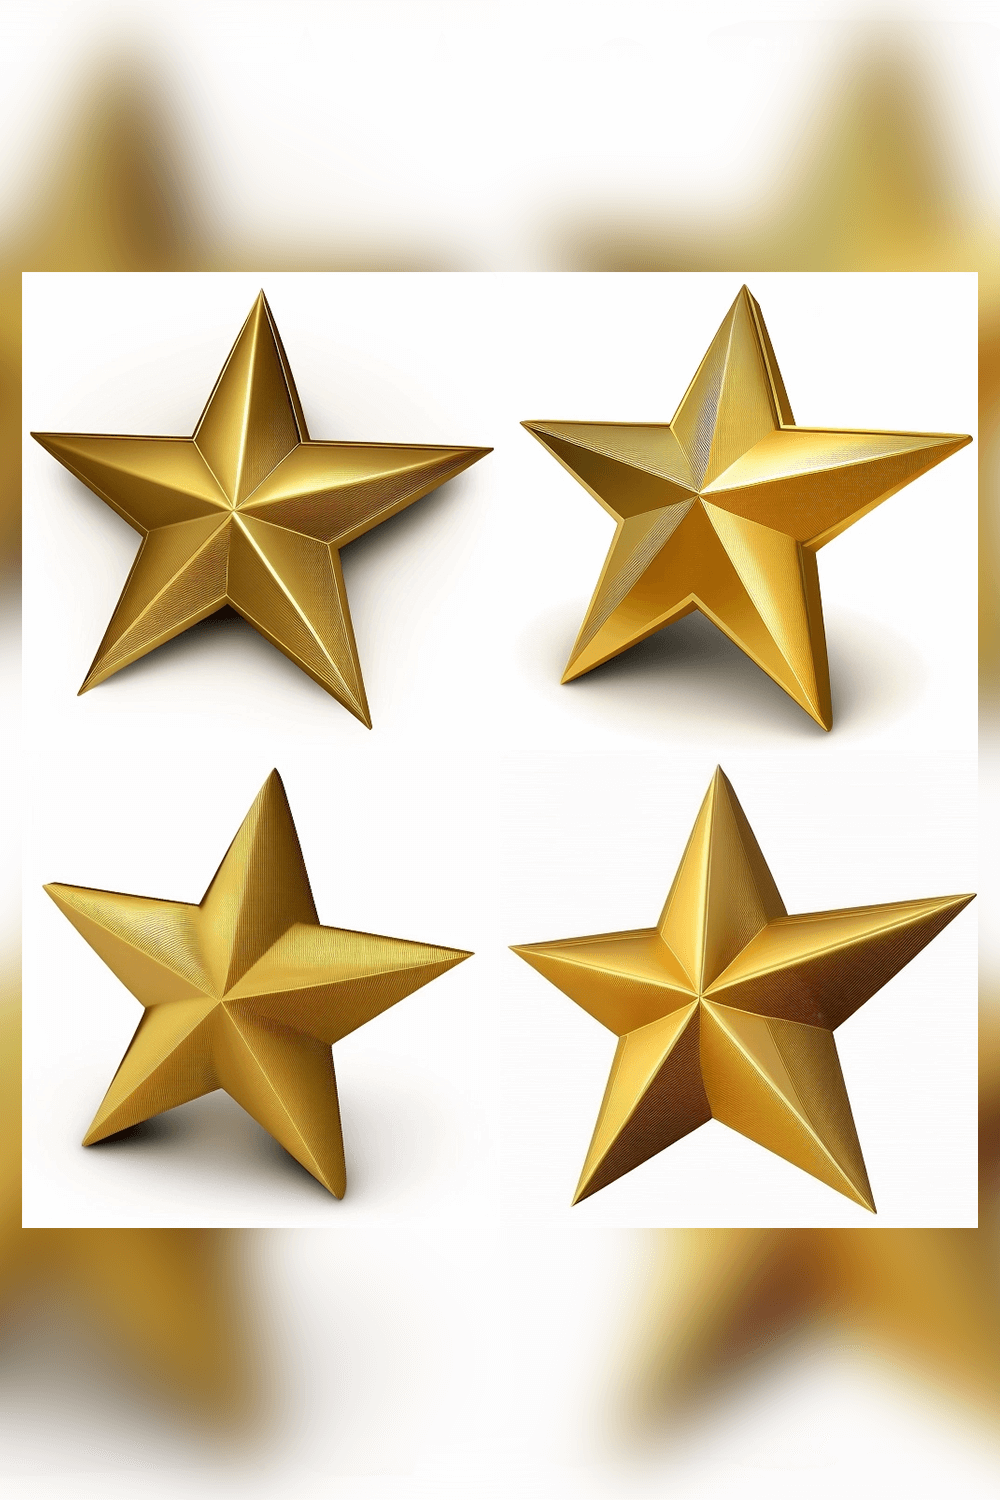 Set of four golden stars on a white background.